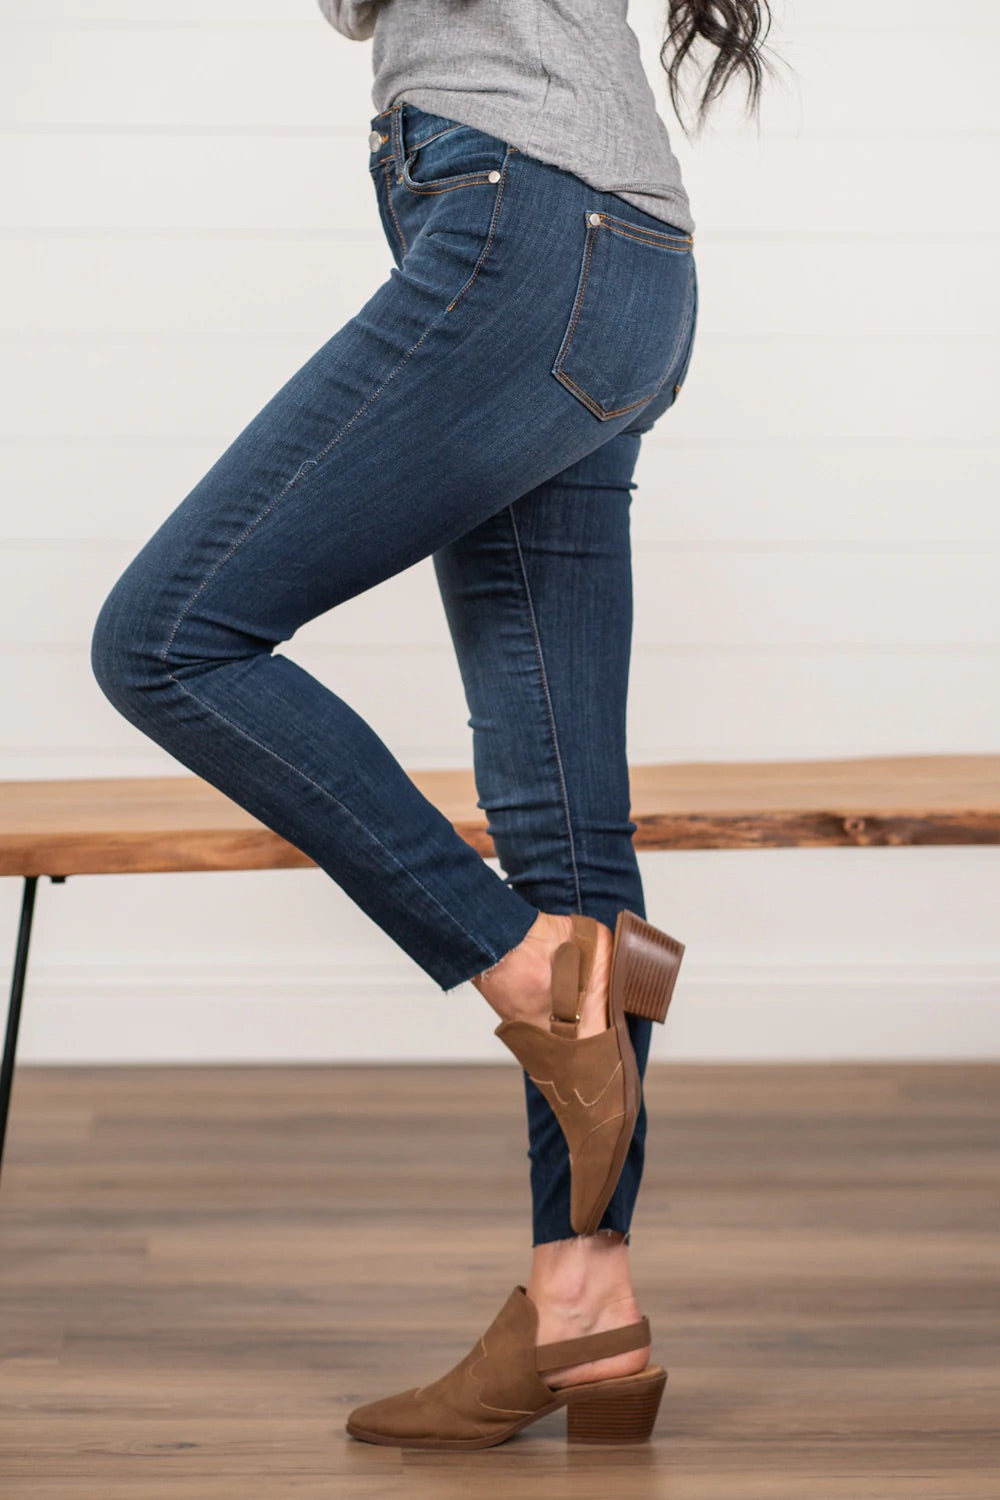 jeans – Fashionably Yours